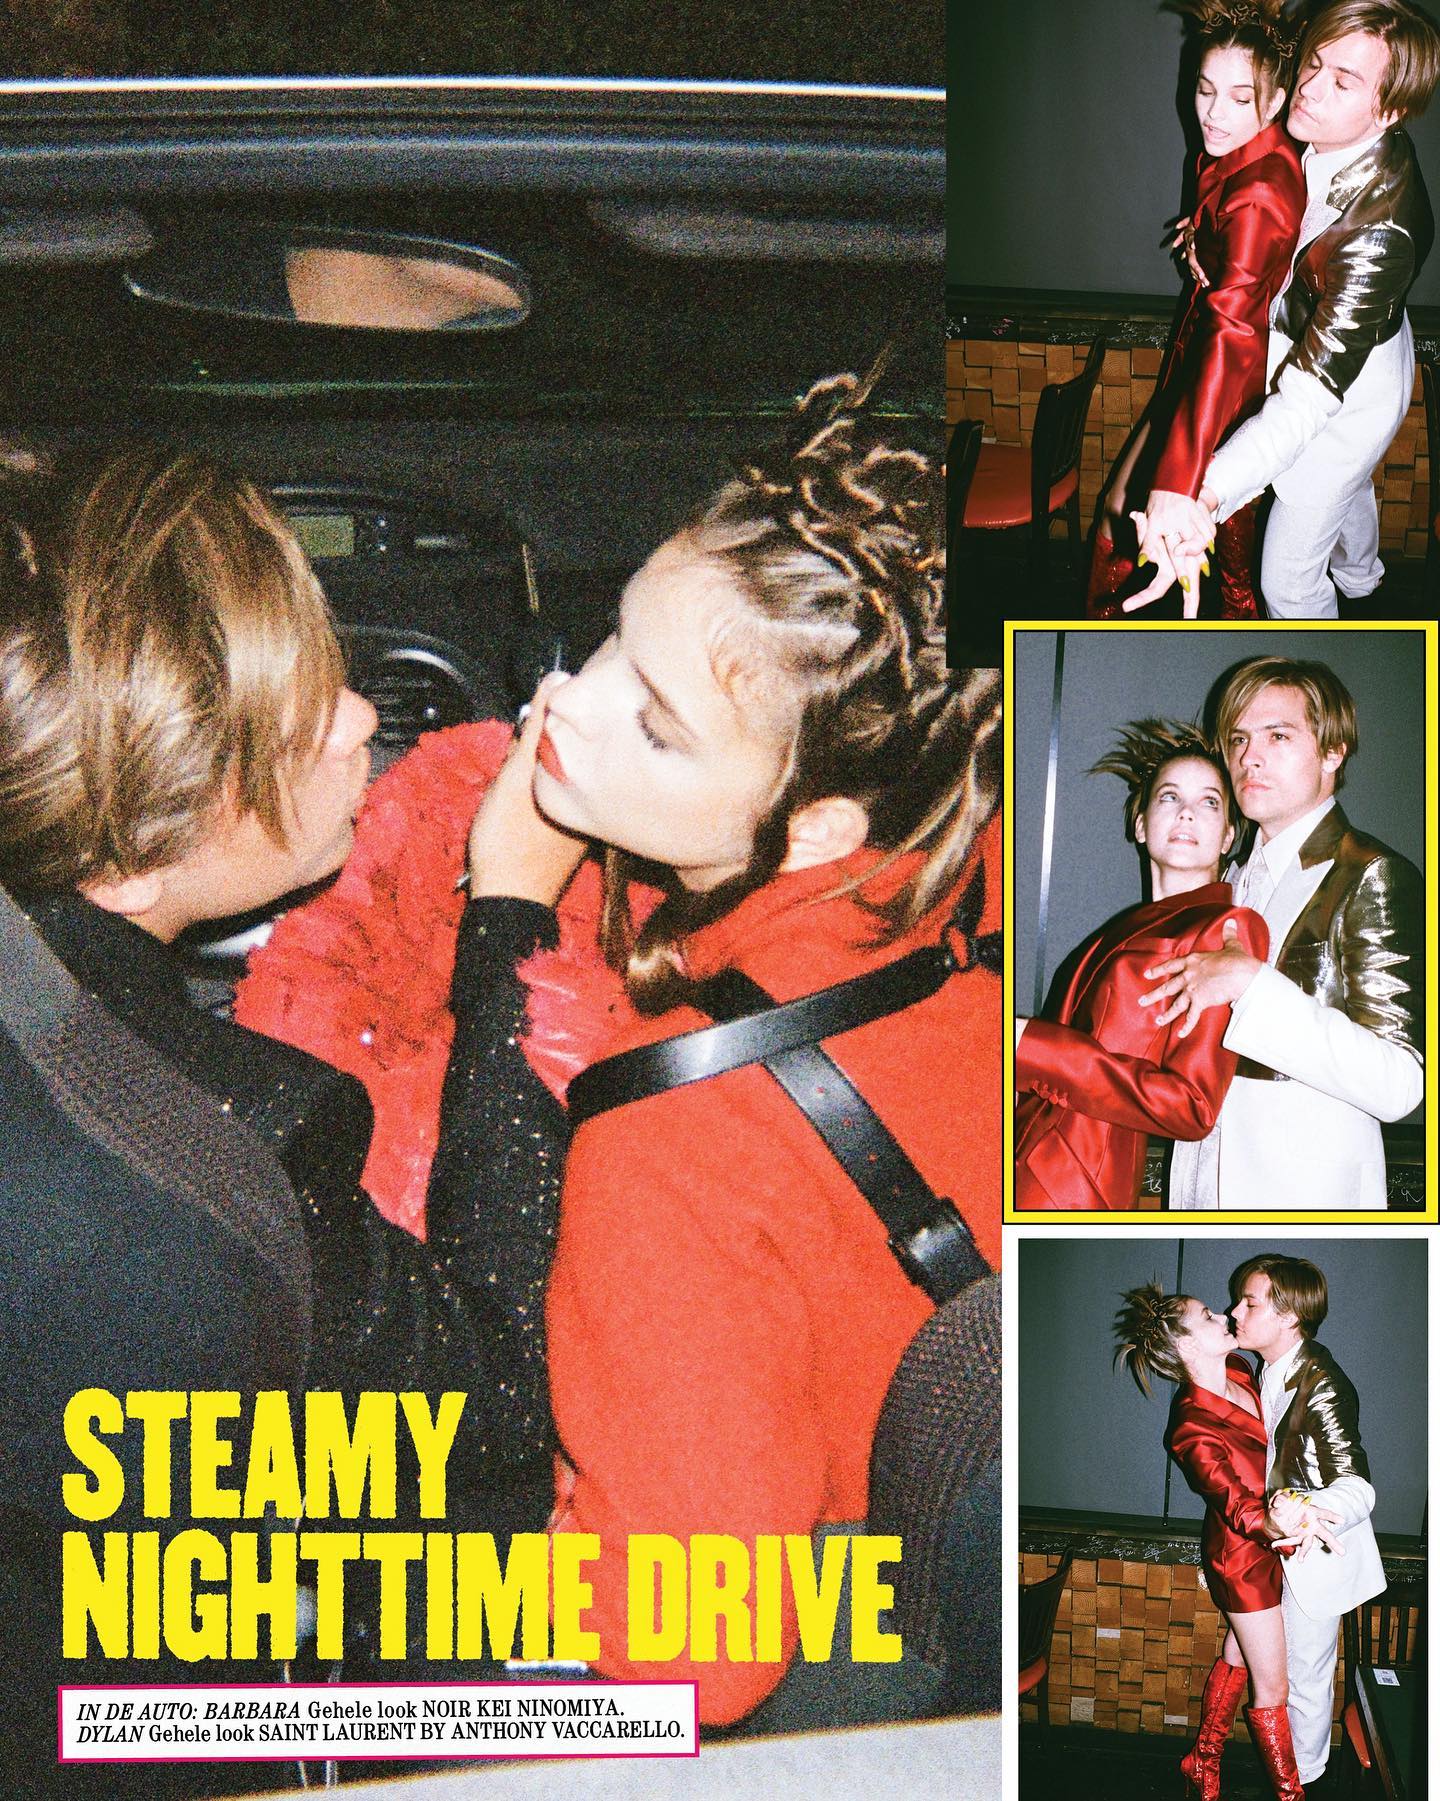 Photos n°5 : Barbara Palvin and Dylan Sprouse Hit the Cover!